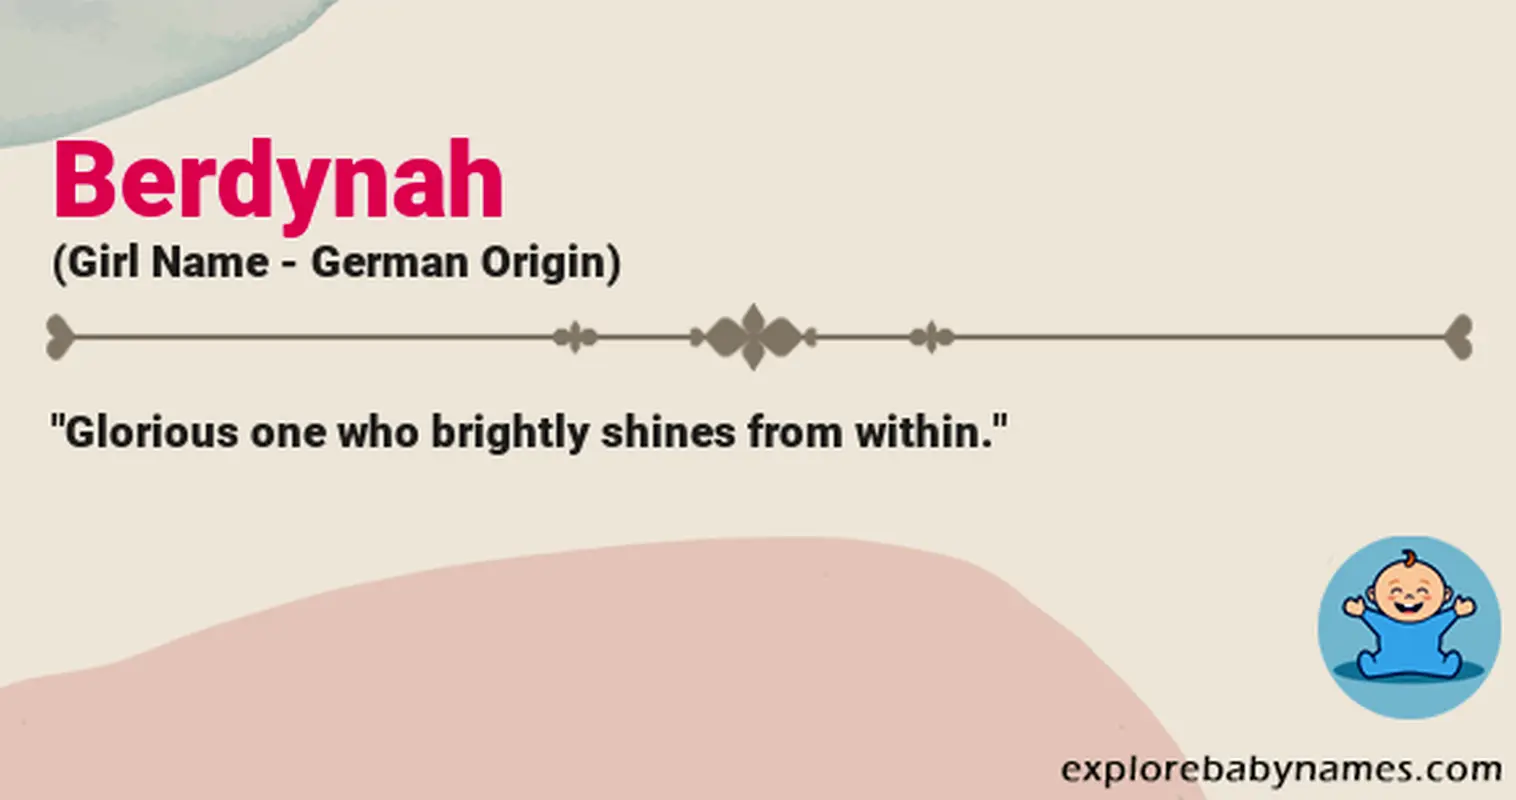 Meaning of Berdynah